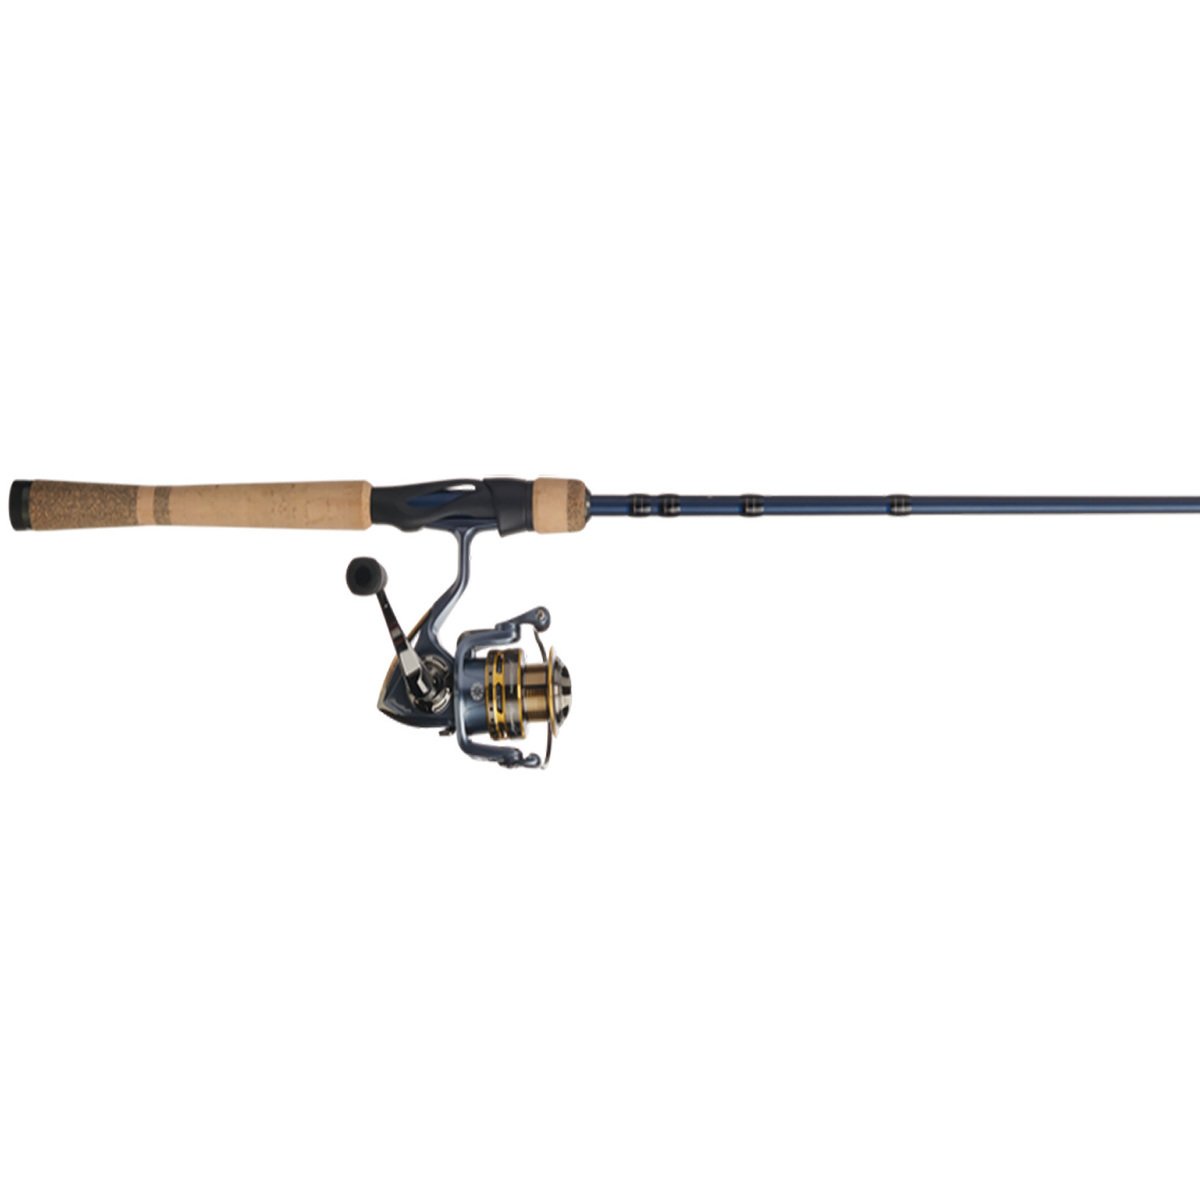 PFLUEGER PRESIDENT SPINNING COMBO WITH FENWICK EAGLE ROD 2 PIECES